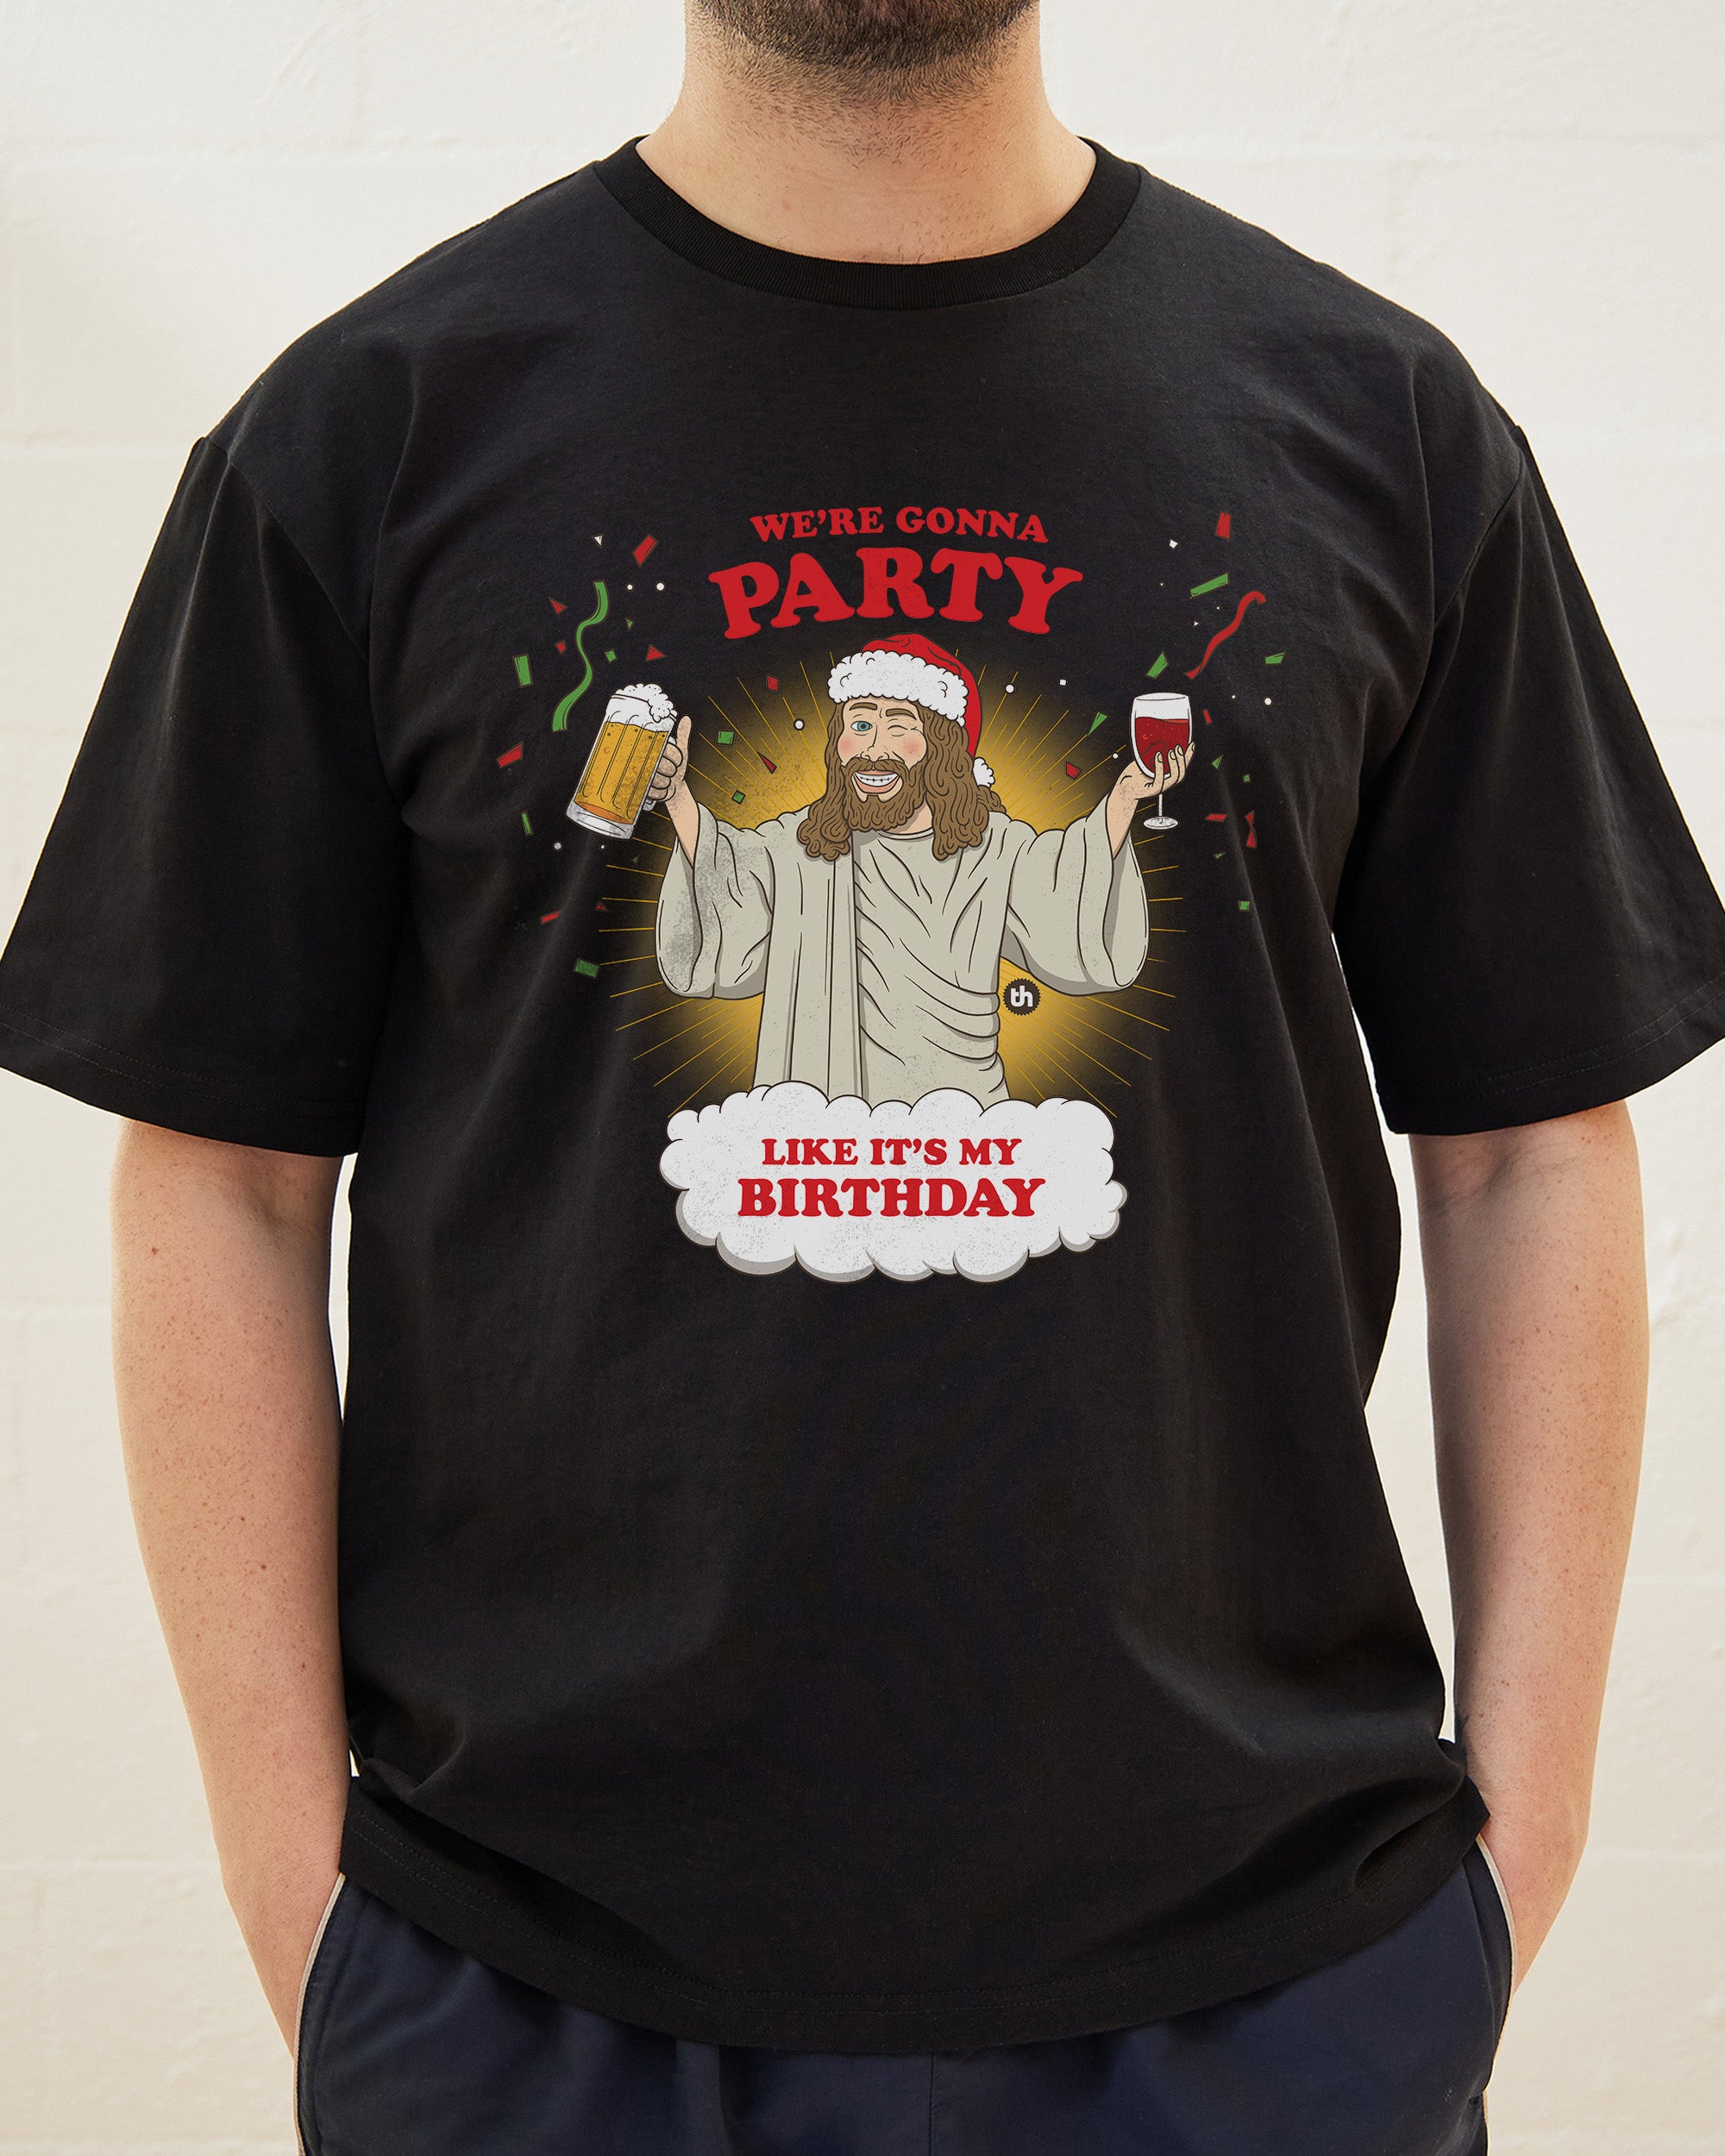 We're Going to Party Like It's My Birthday T-Shirt